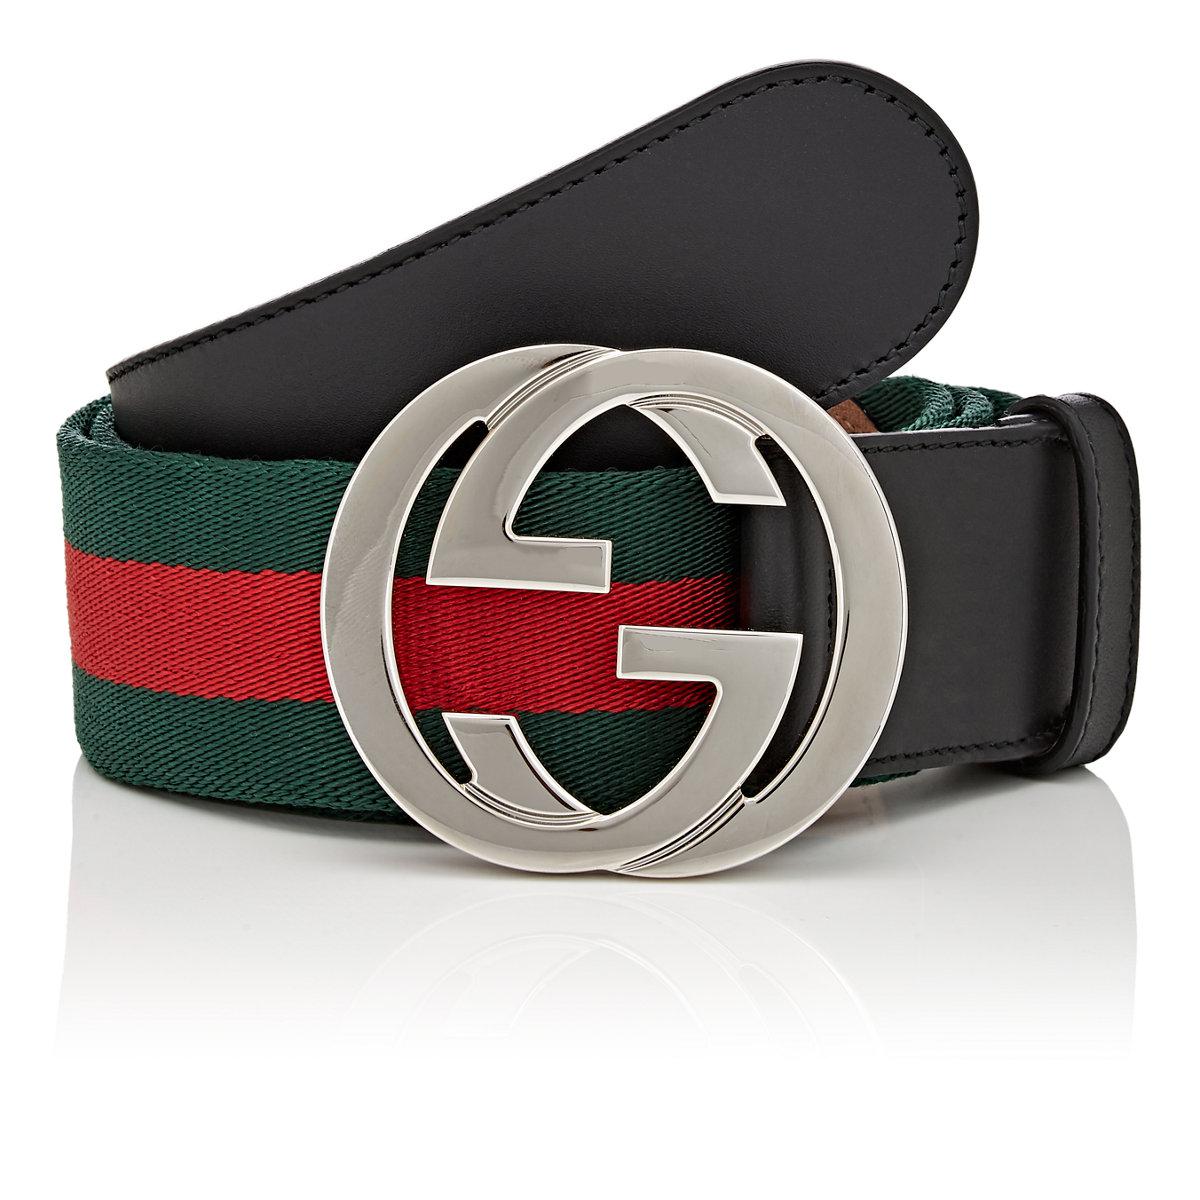 Nail Your Fashion Statement Every Time With A Gucci Belt